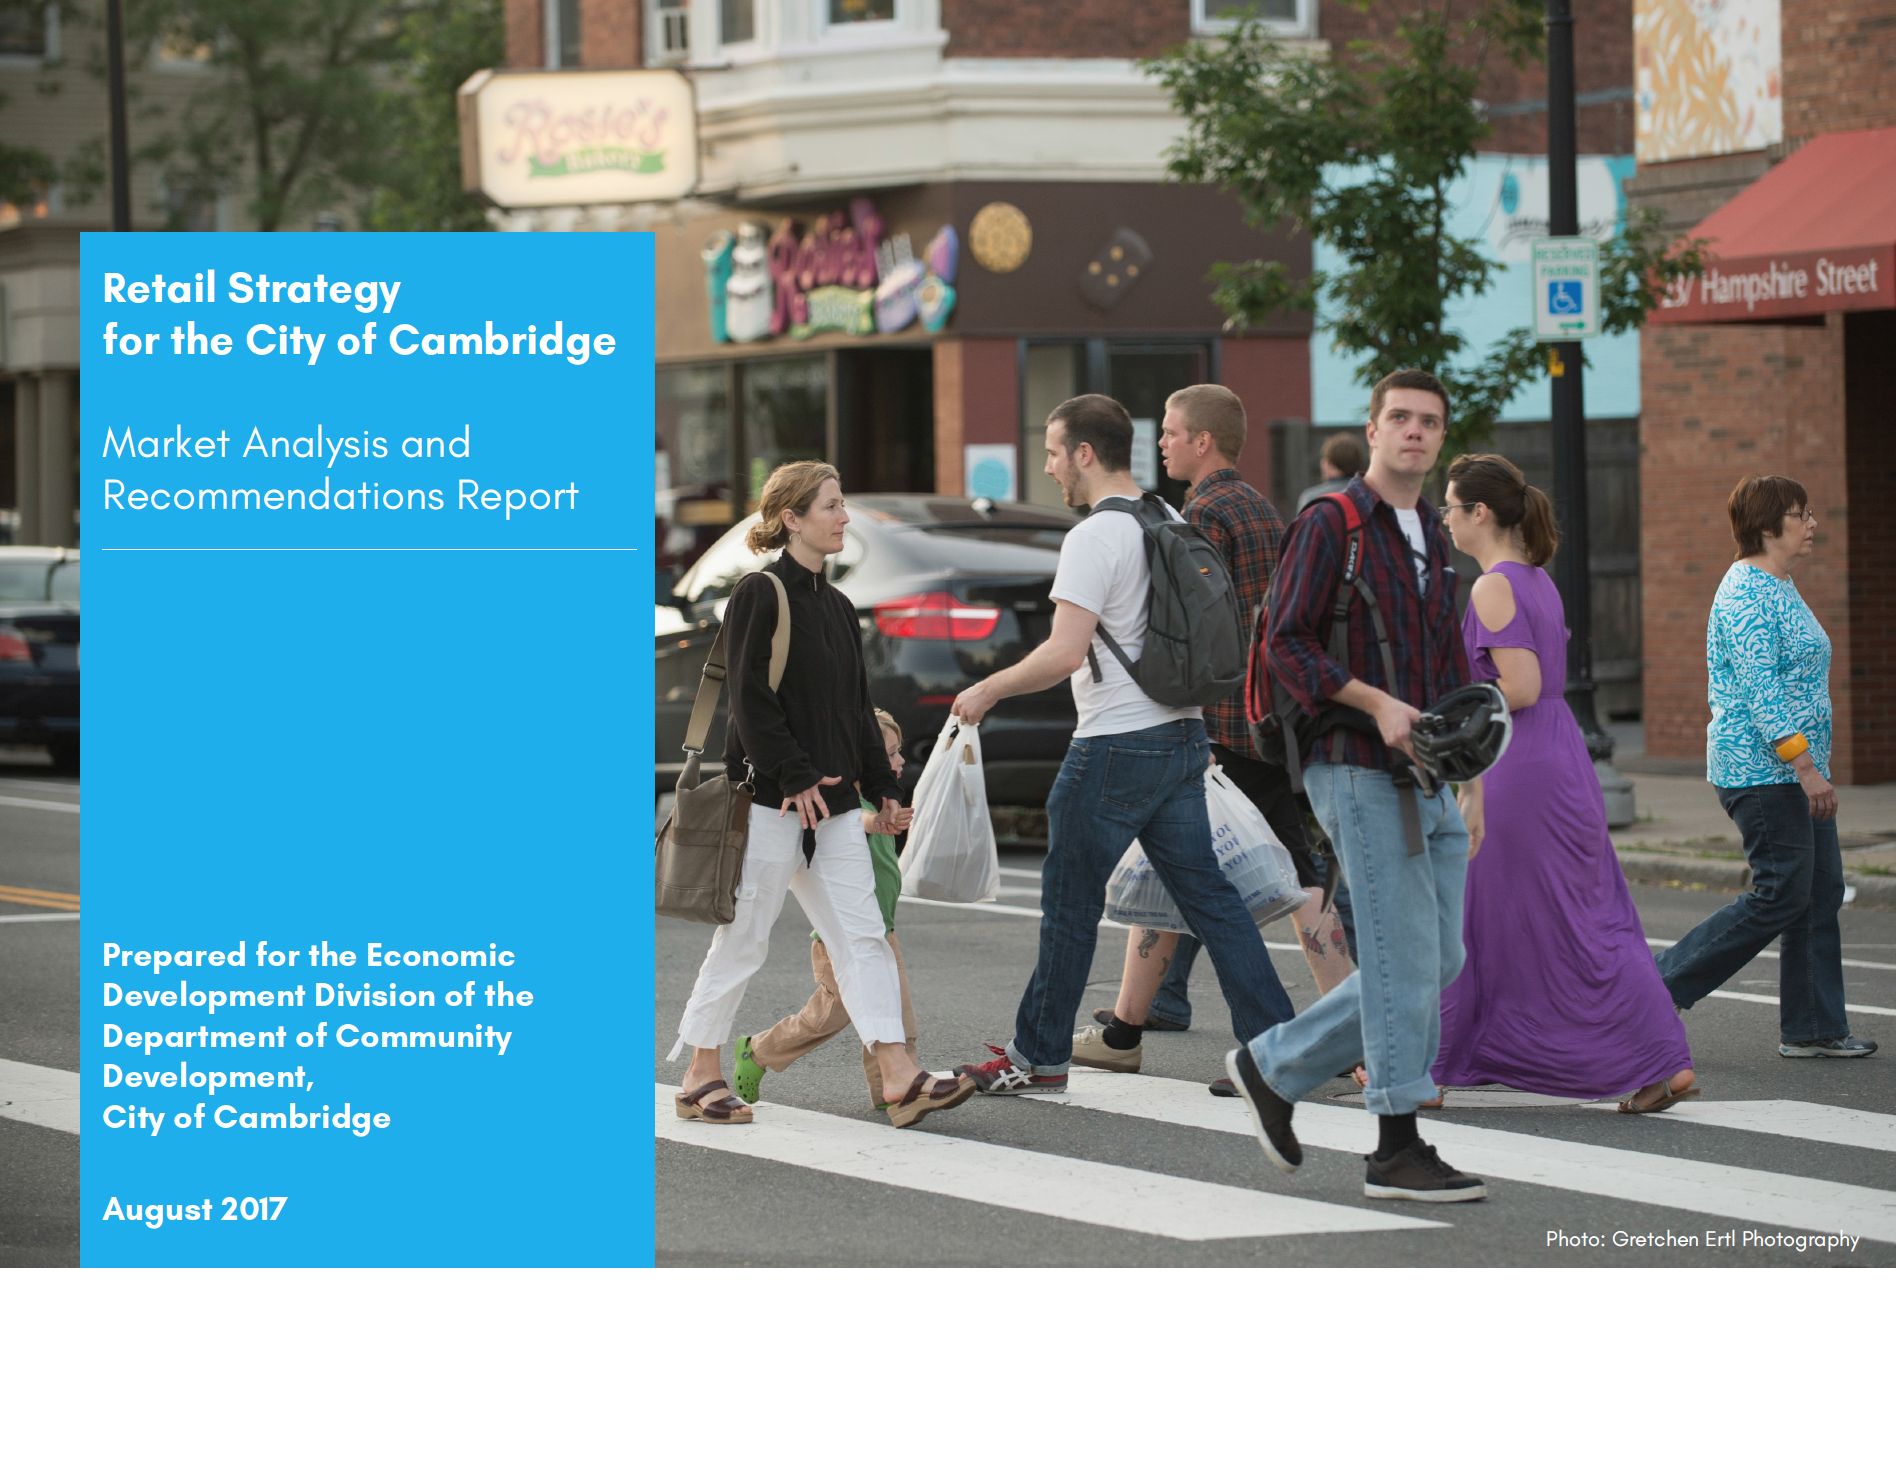 Retail Strategy for the City of Cambridge